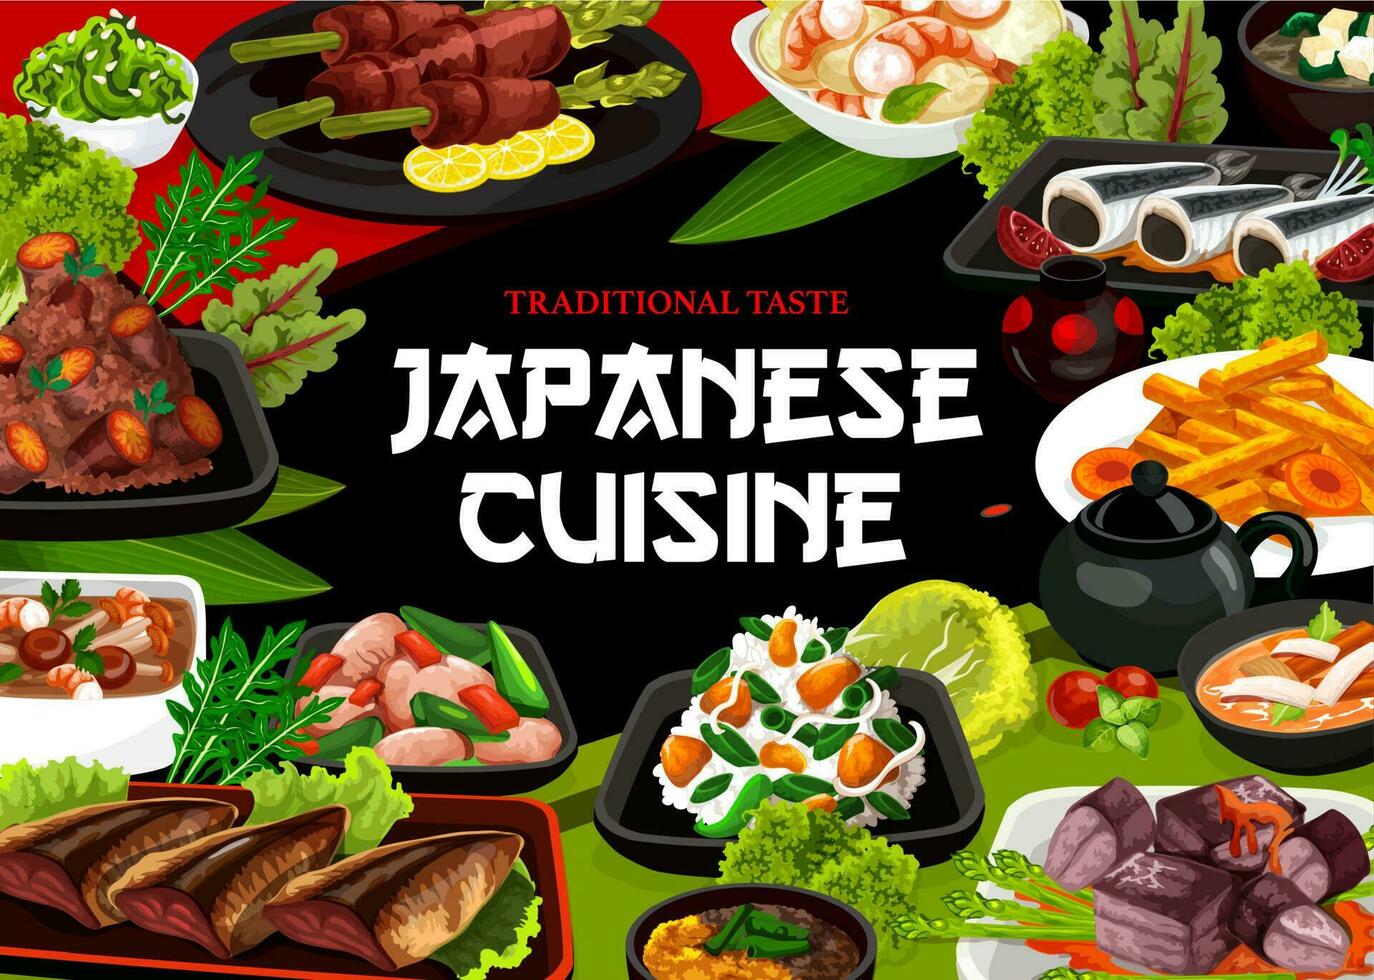 Japanese cuisine traditional dishes, food menu vector